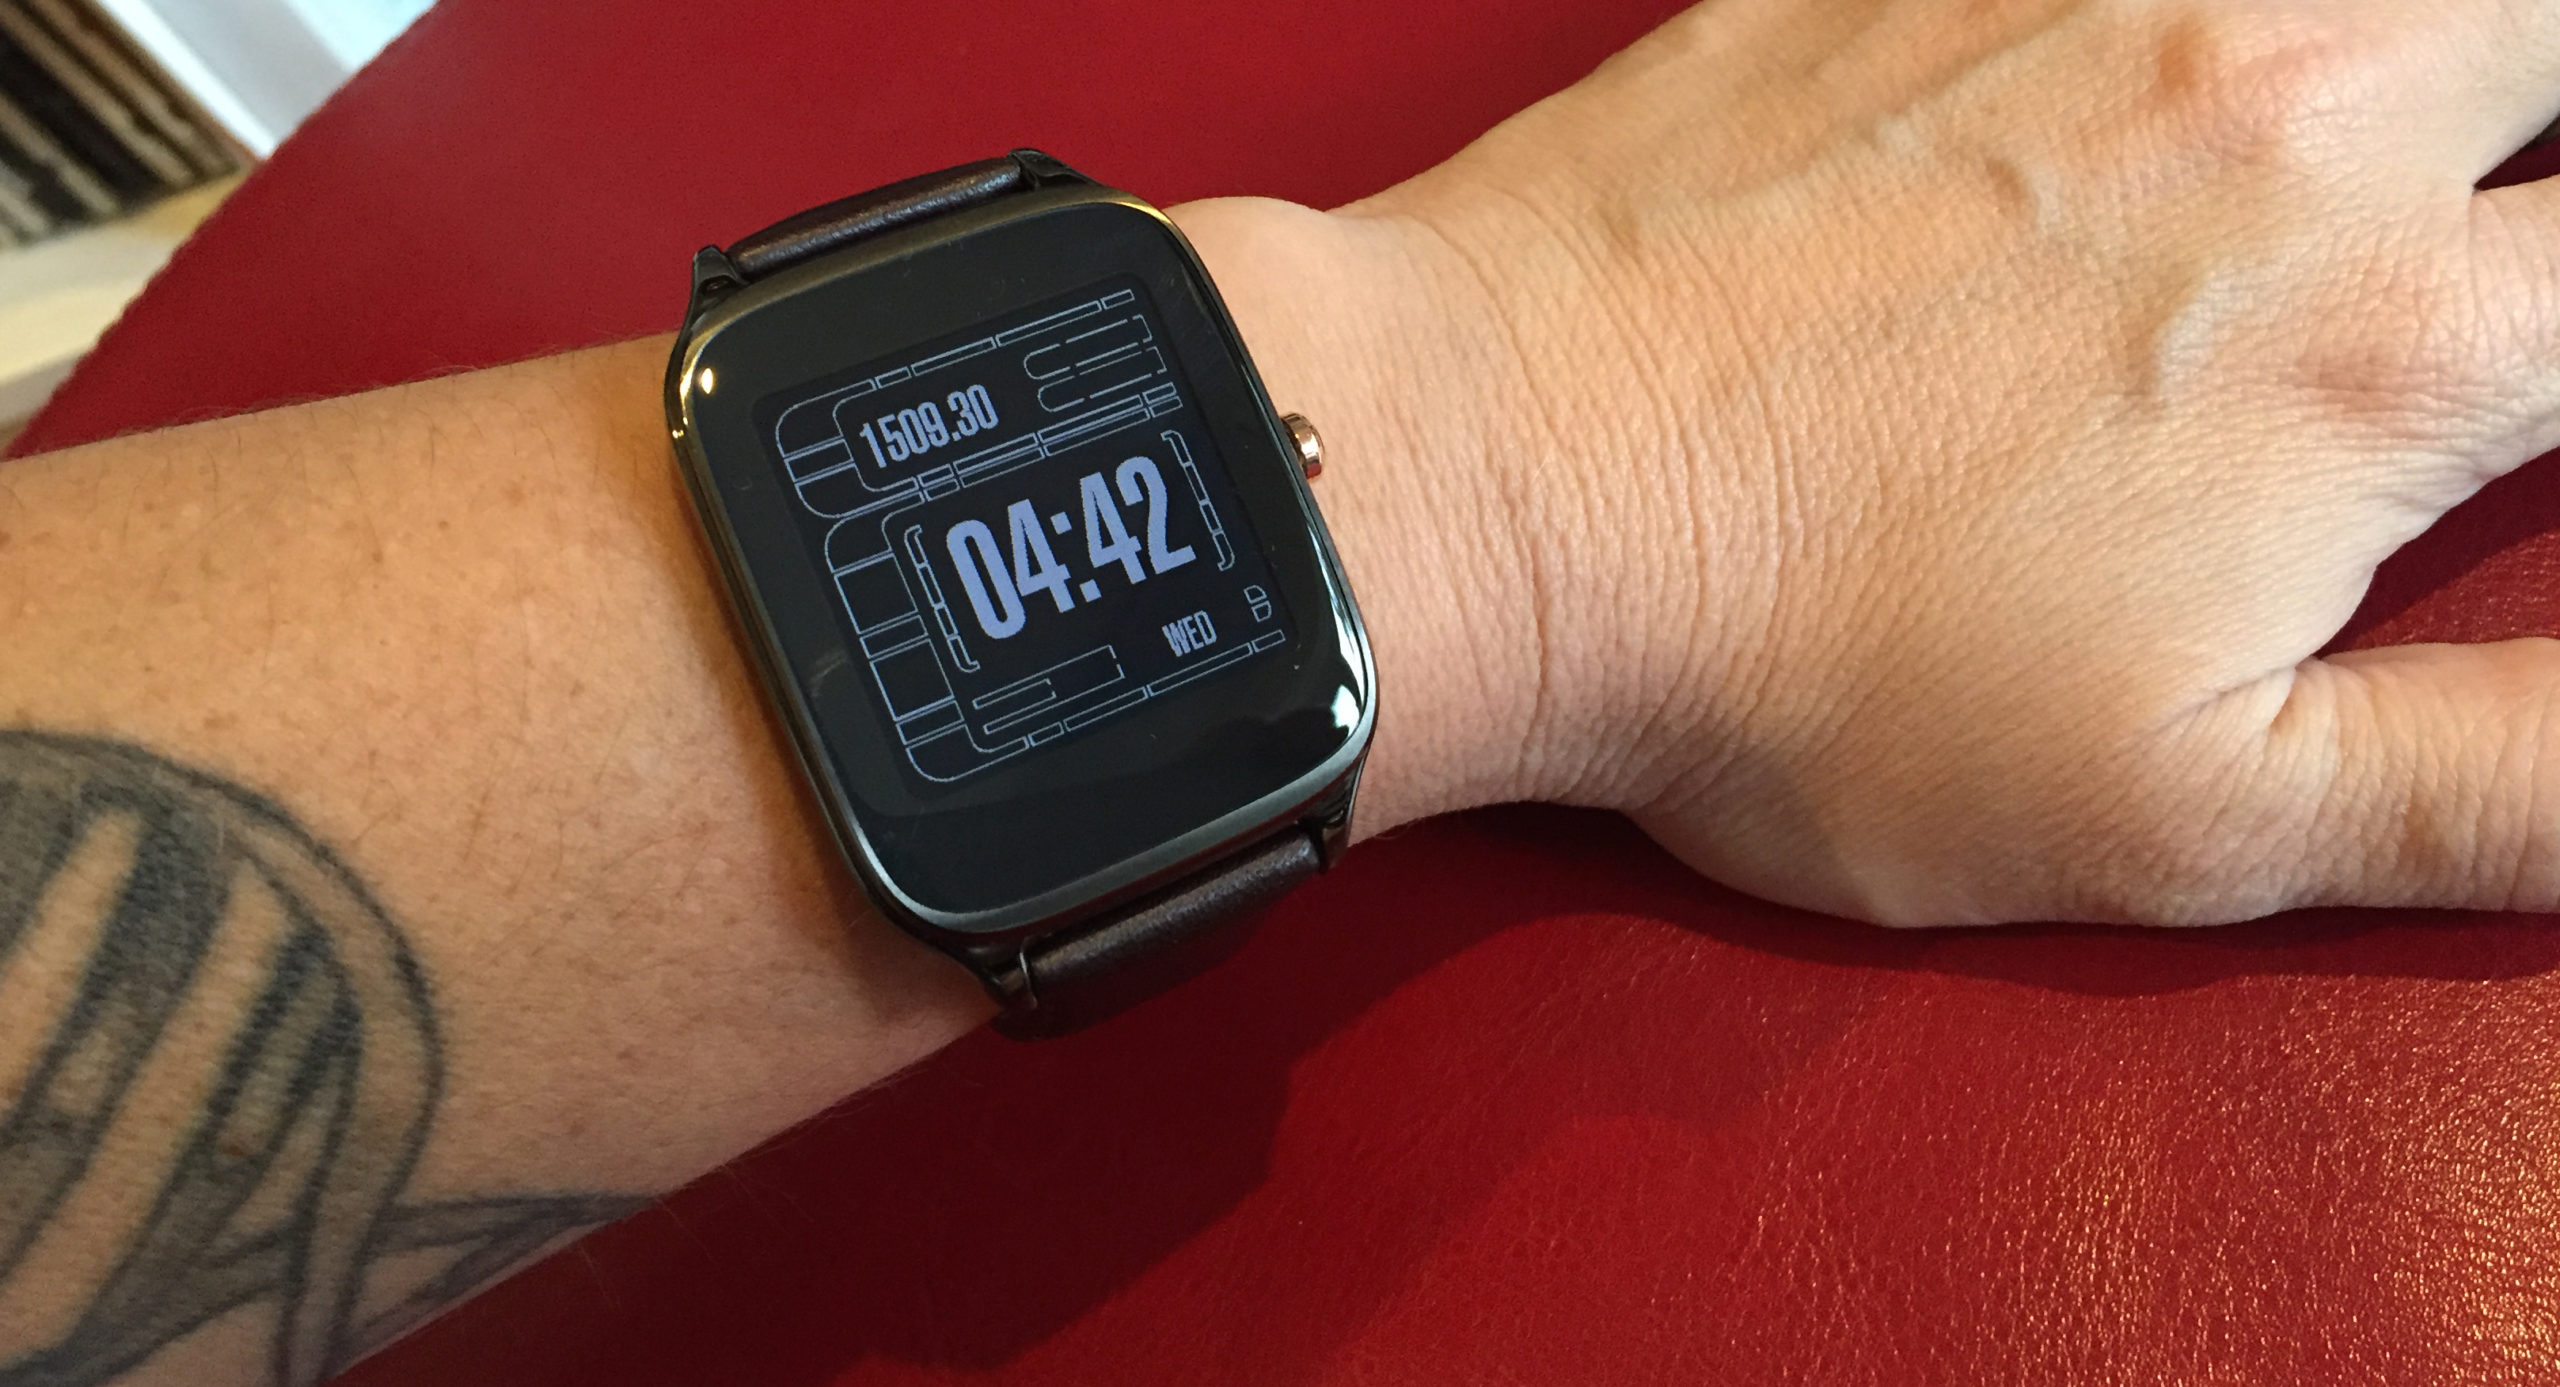 Asus ZenWatch 2 Review: A Great Way To Get Started With Smartwatches